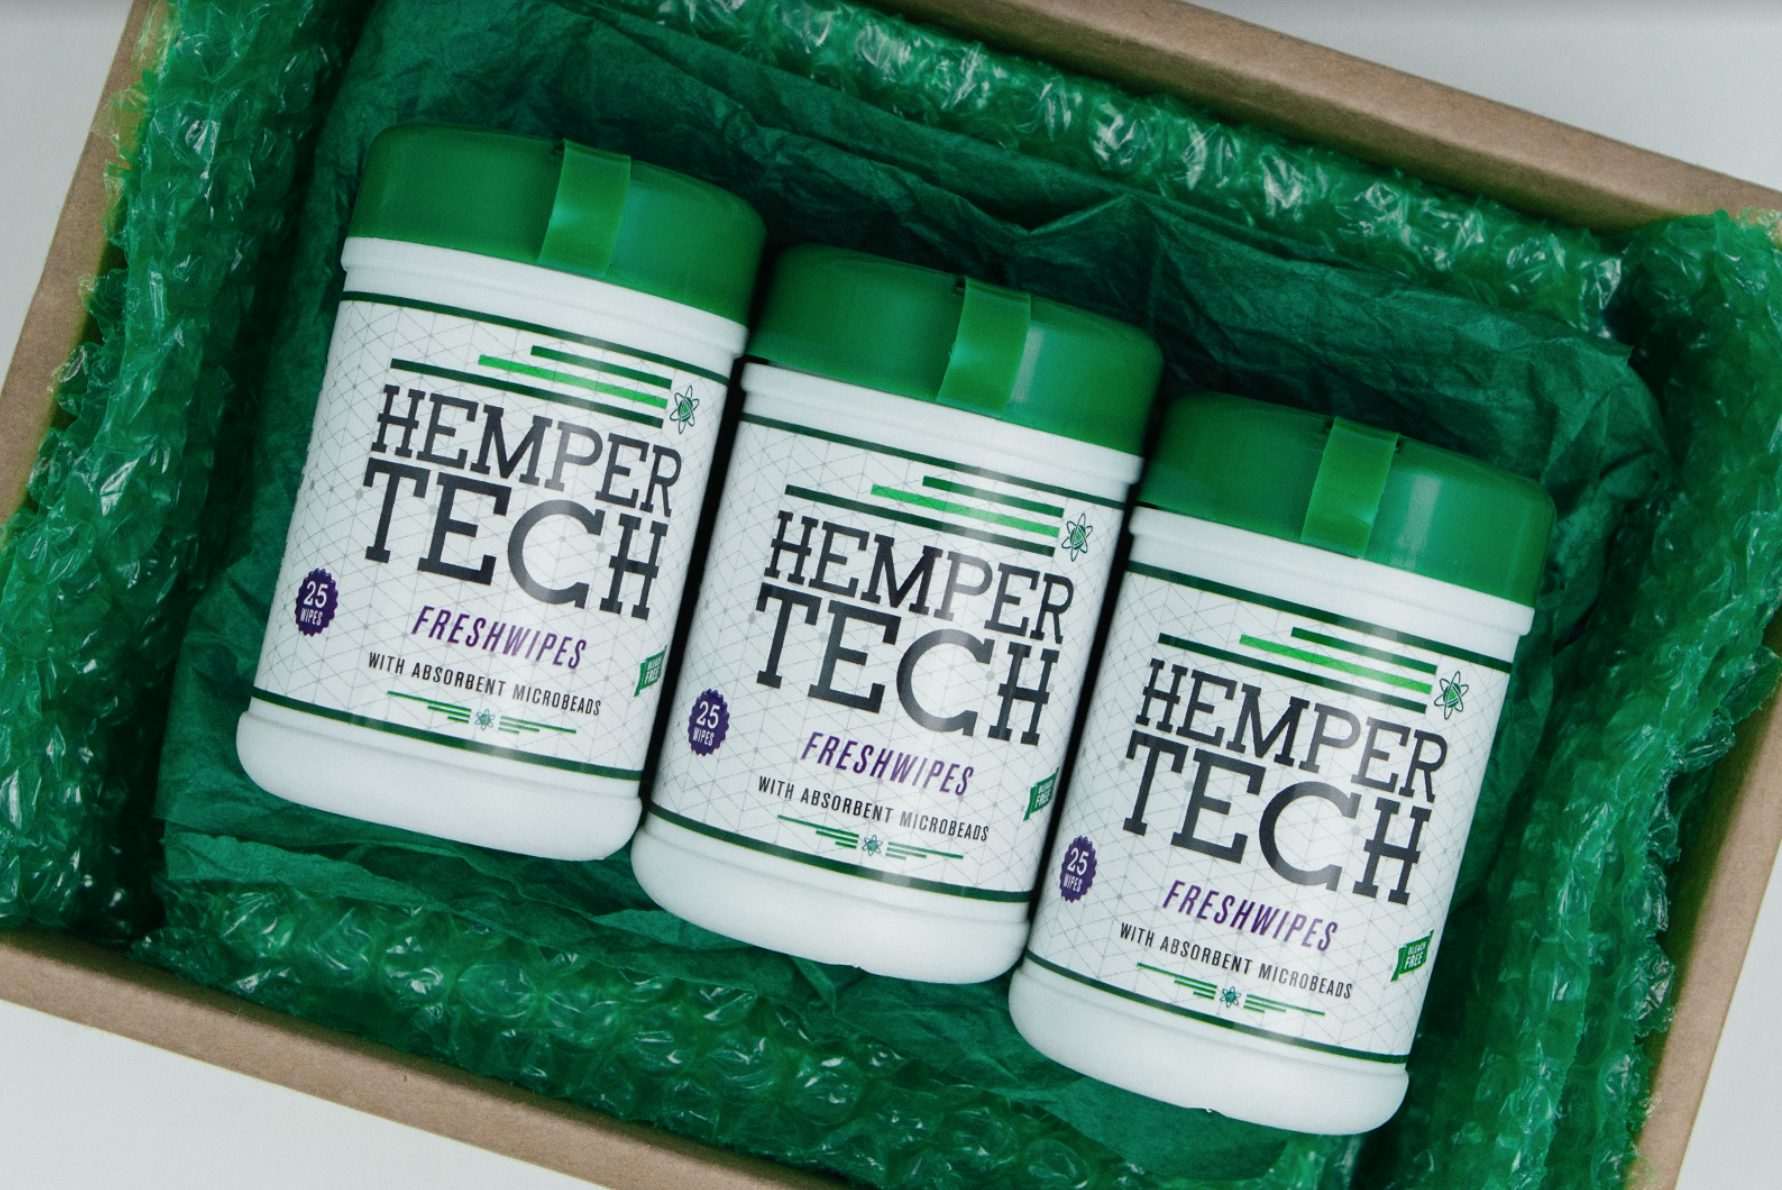 5 Smoking Products We Would Have Never Discovered Without Hemper Here Are Our 5 Favorite Weed Products We Would Never Have Found Without Hemper